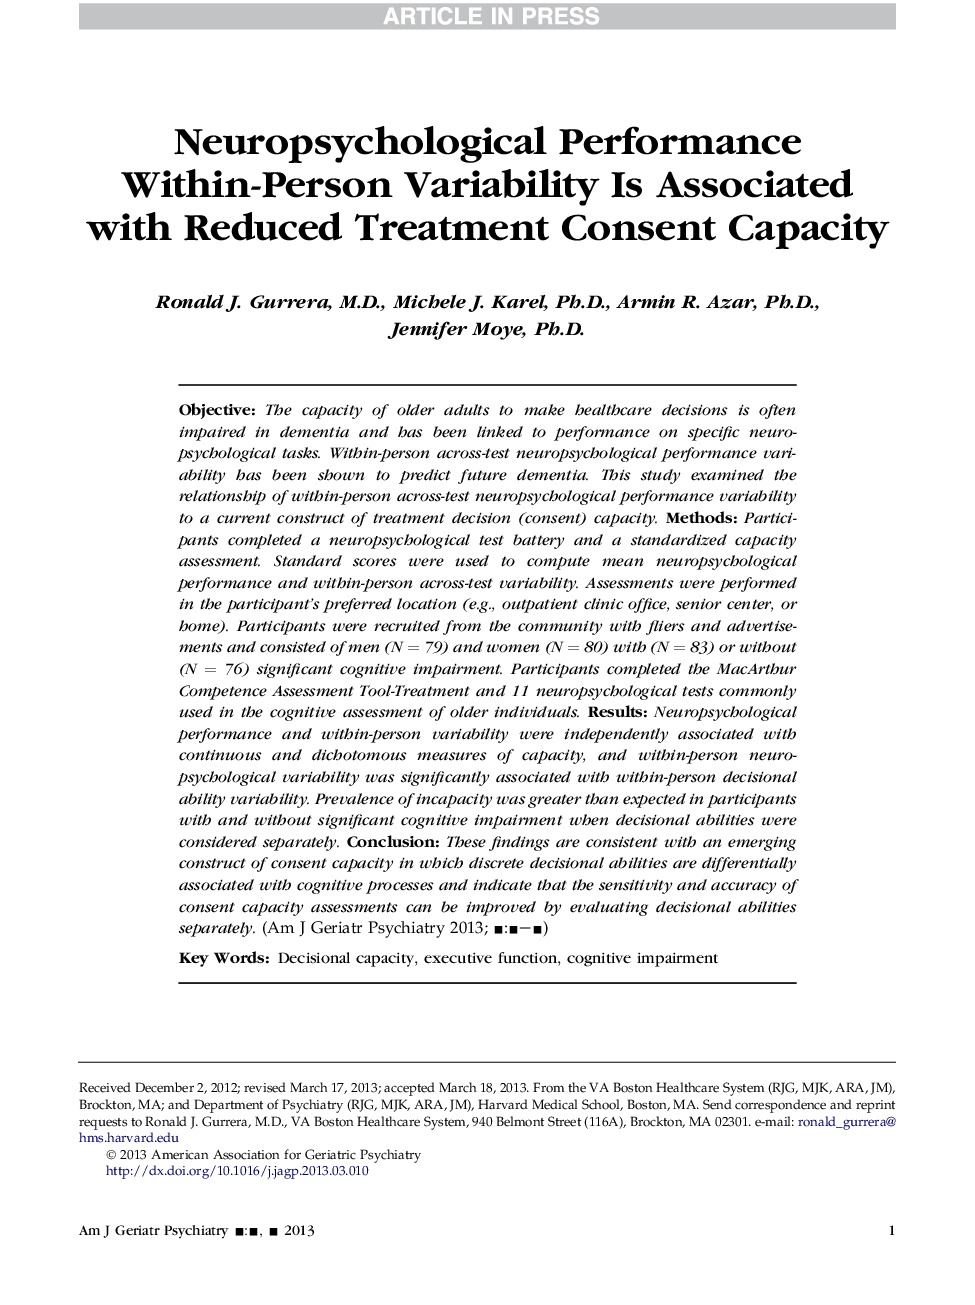 Neuropsychological Performance Within-Person Variability Is Associated with Reduced Treatment Consent Capacity